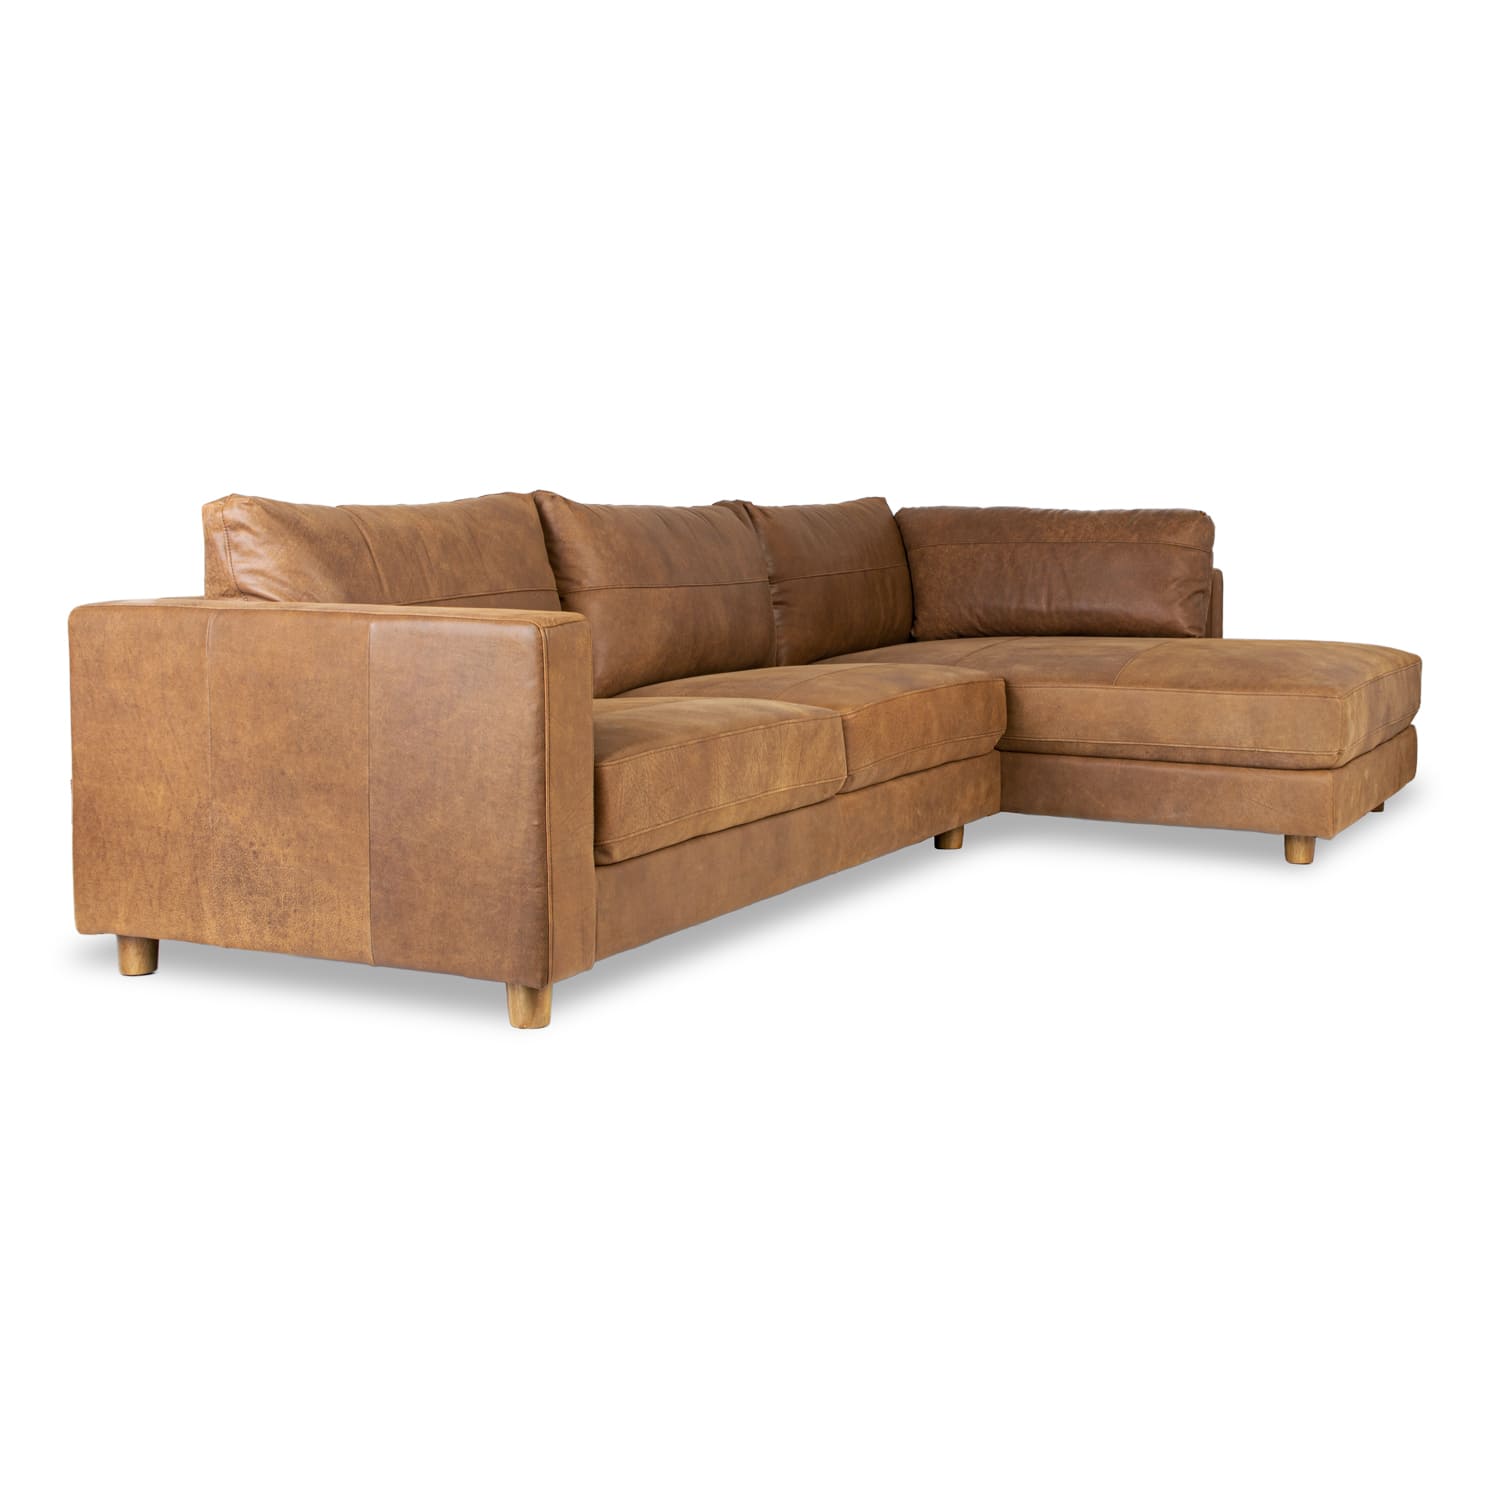 Barcelona Leather Right Side Facing Chaise Lounge